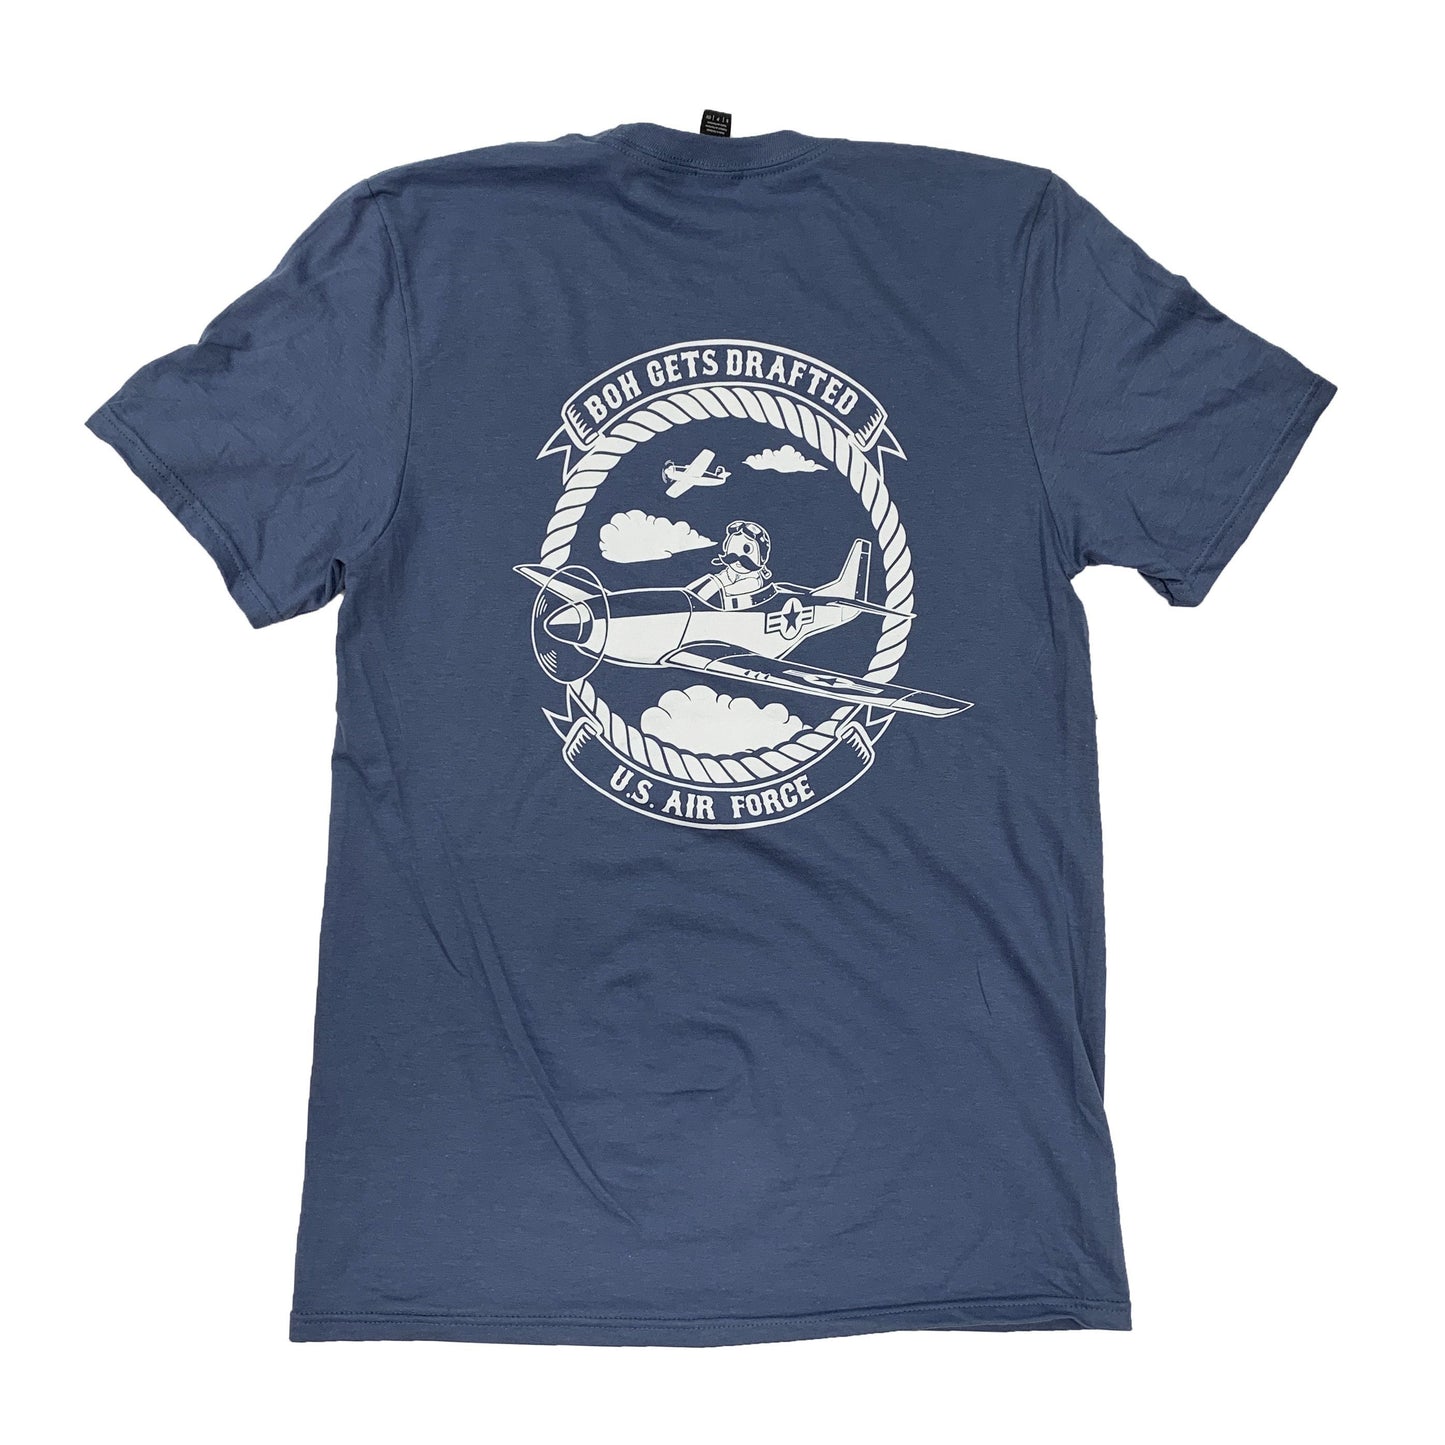 Natty Boh Airman Gets Drafted (Lake) / Shirt - Route One Apparel